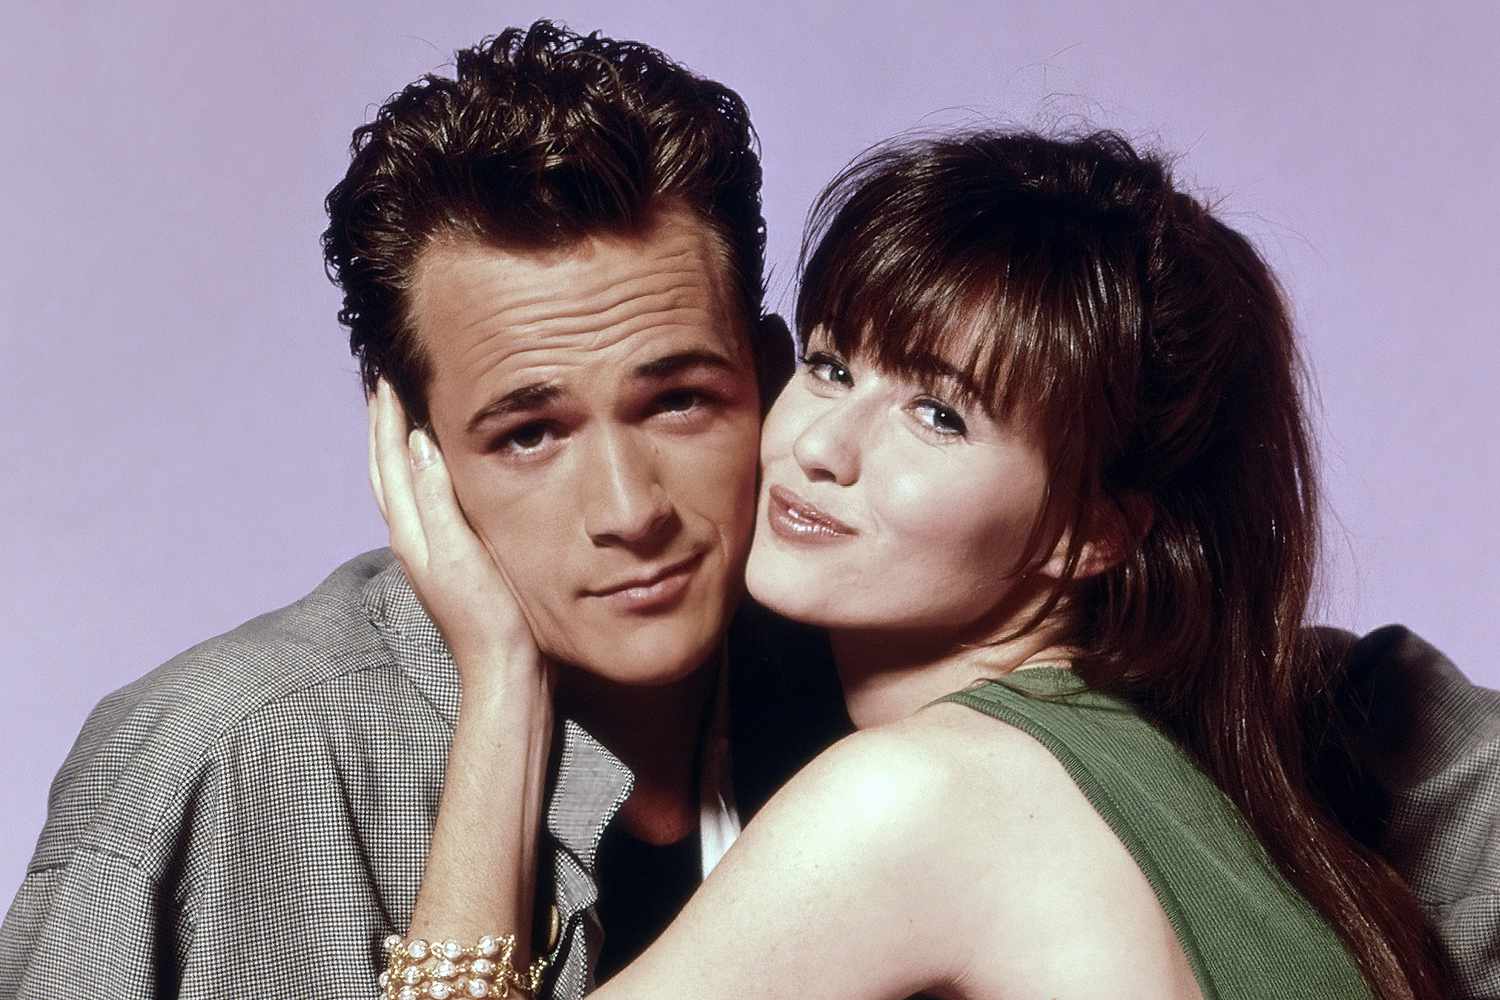 Fans React to Shannen Doherty’s Death After ‘90210’ Costar Luke Perry [Video]